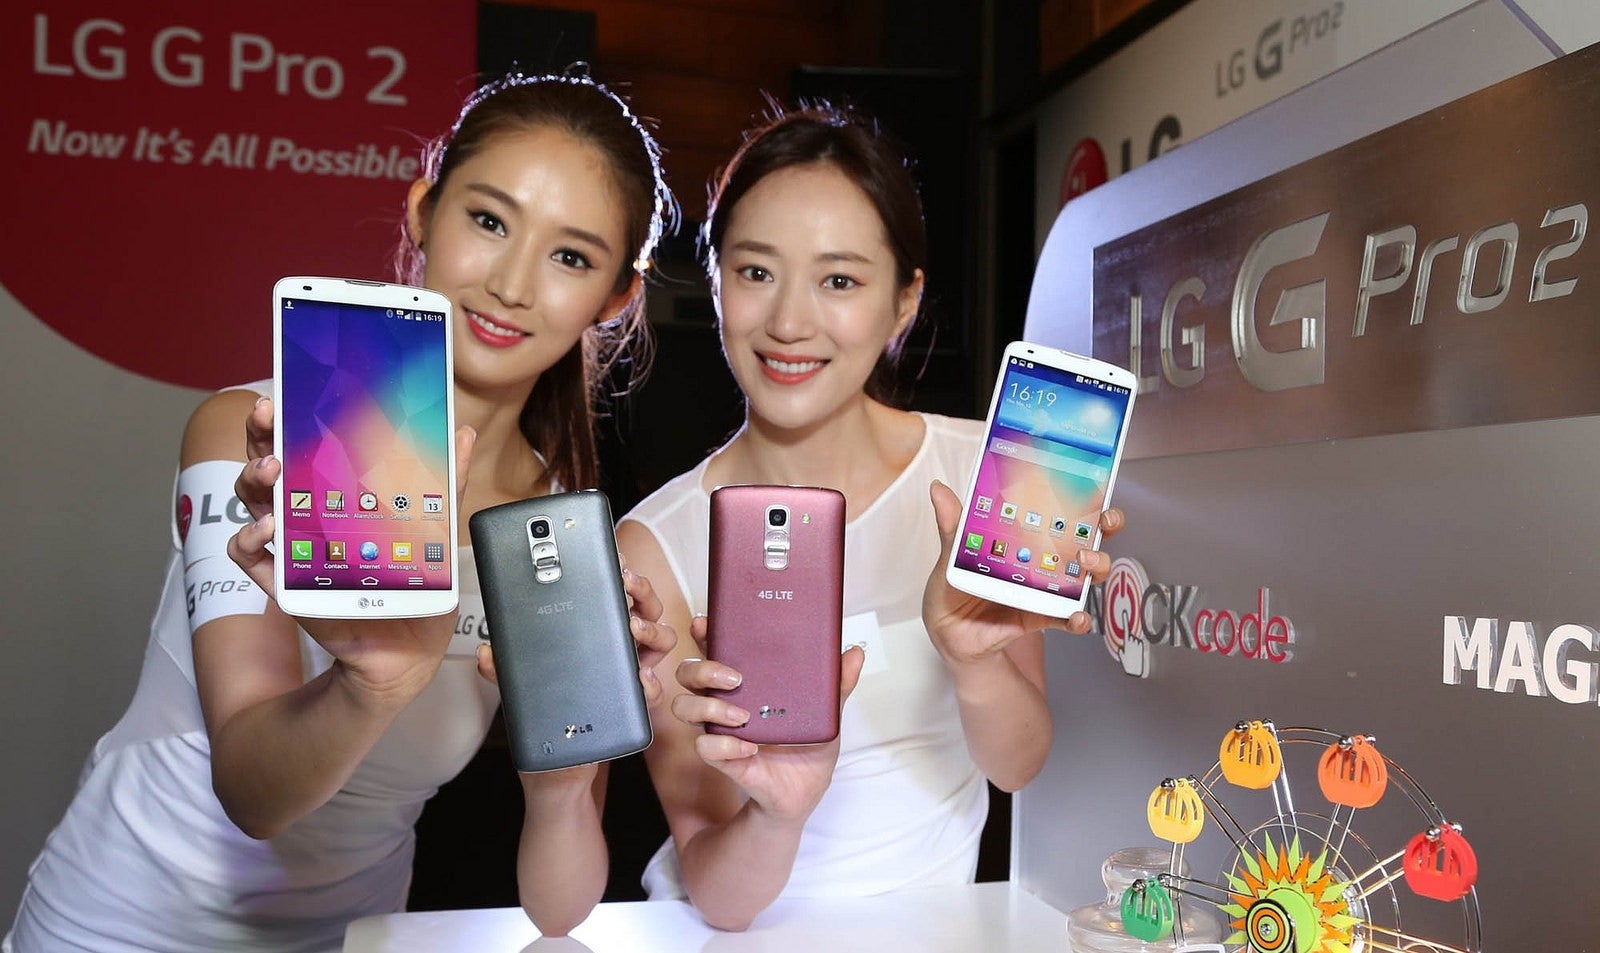 LG G Pro 2 is cheaper than Samsung Galaxy S5 in Asia